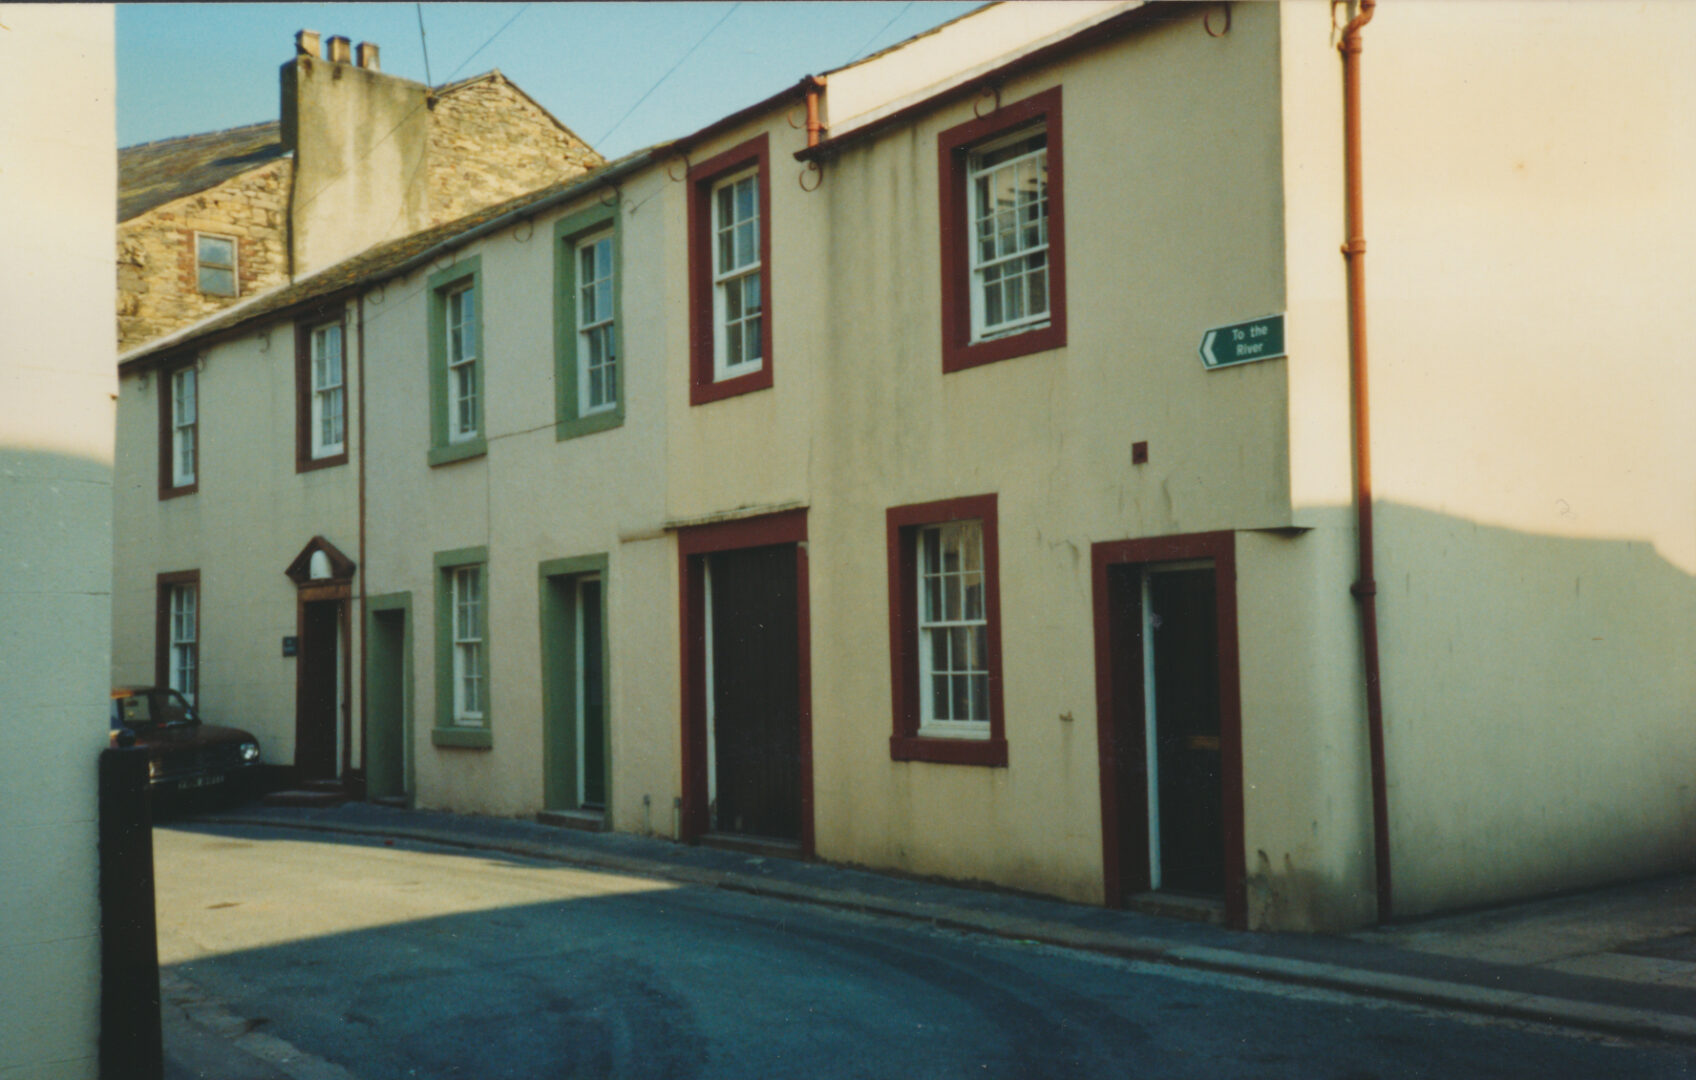 Waterloo Street 21 23 front elevation after renovation 1989 photo